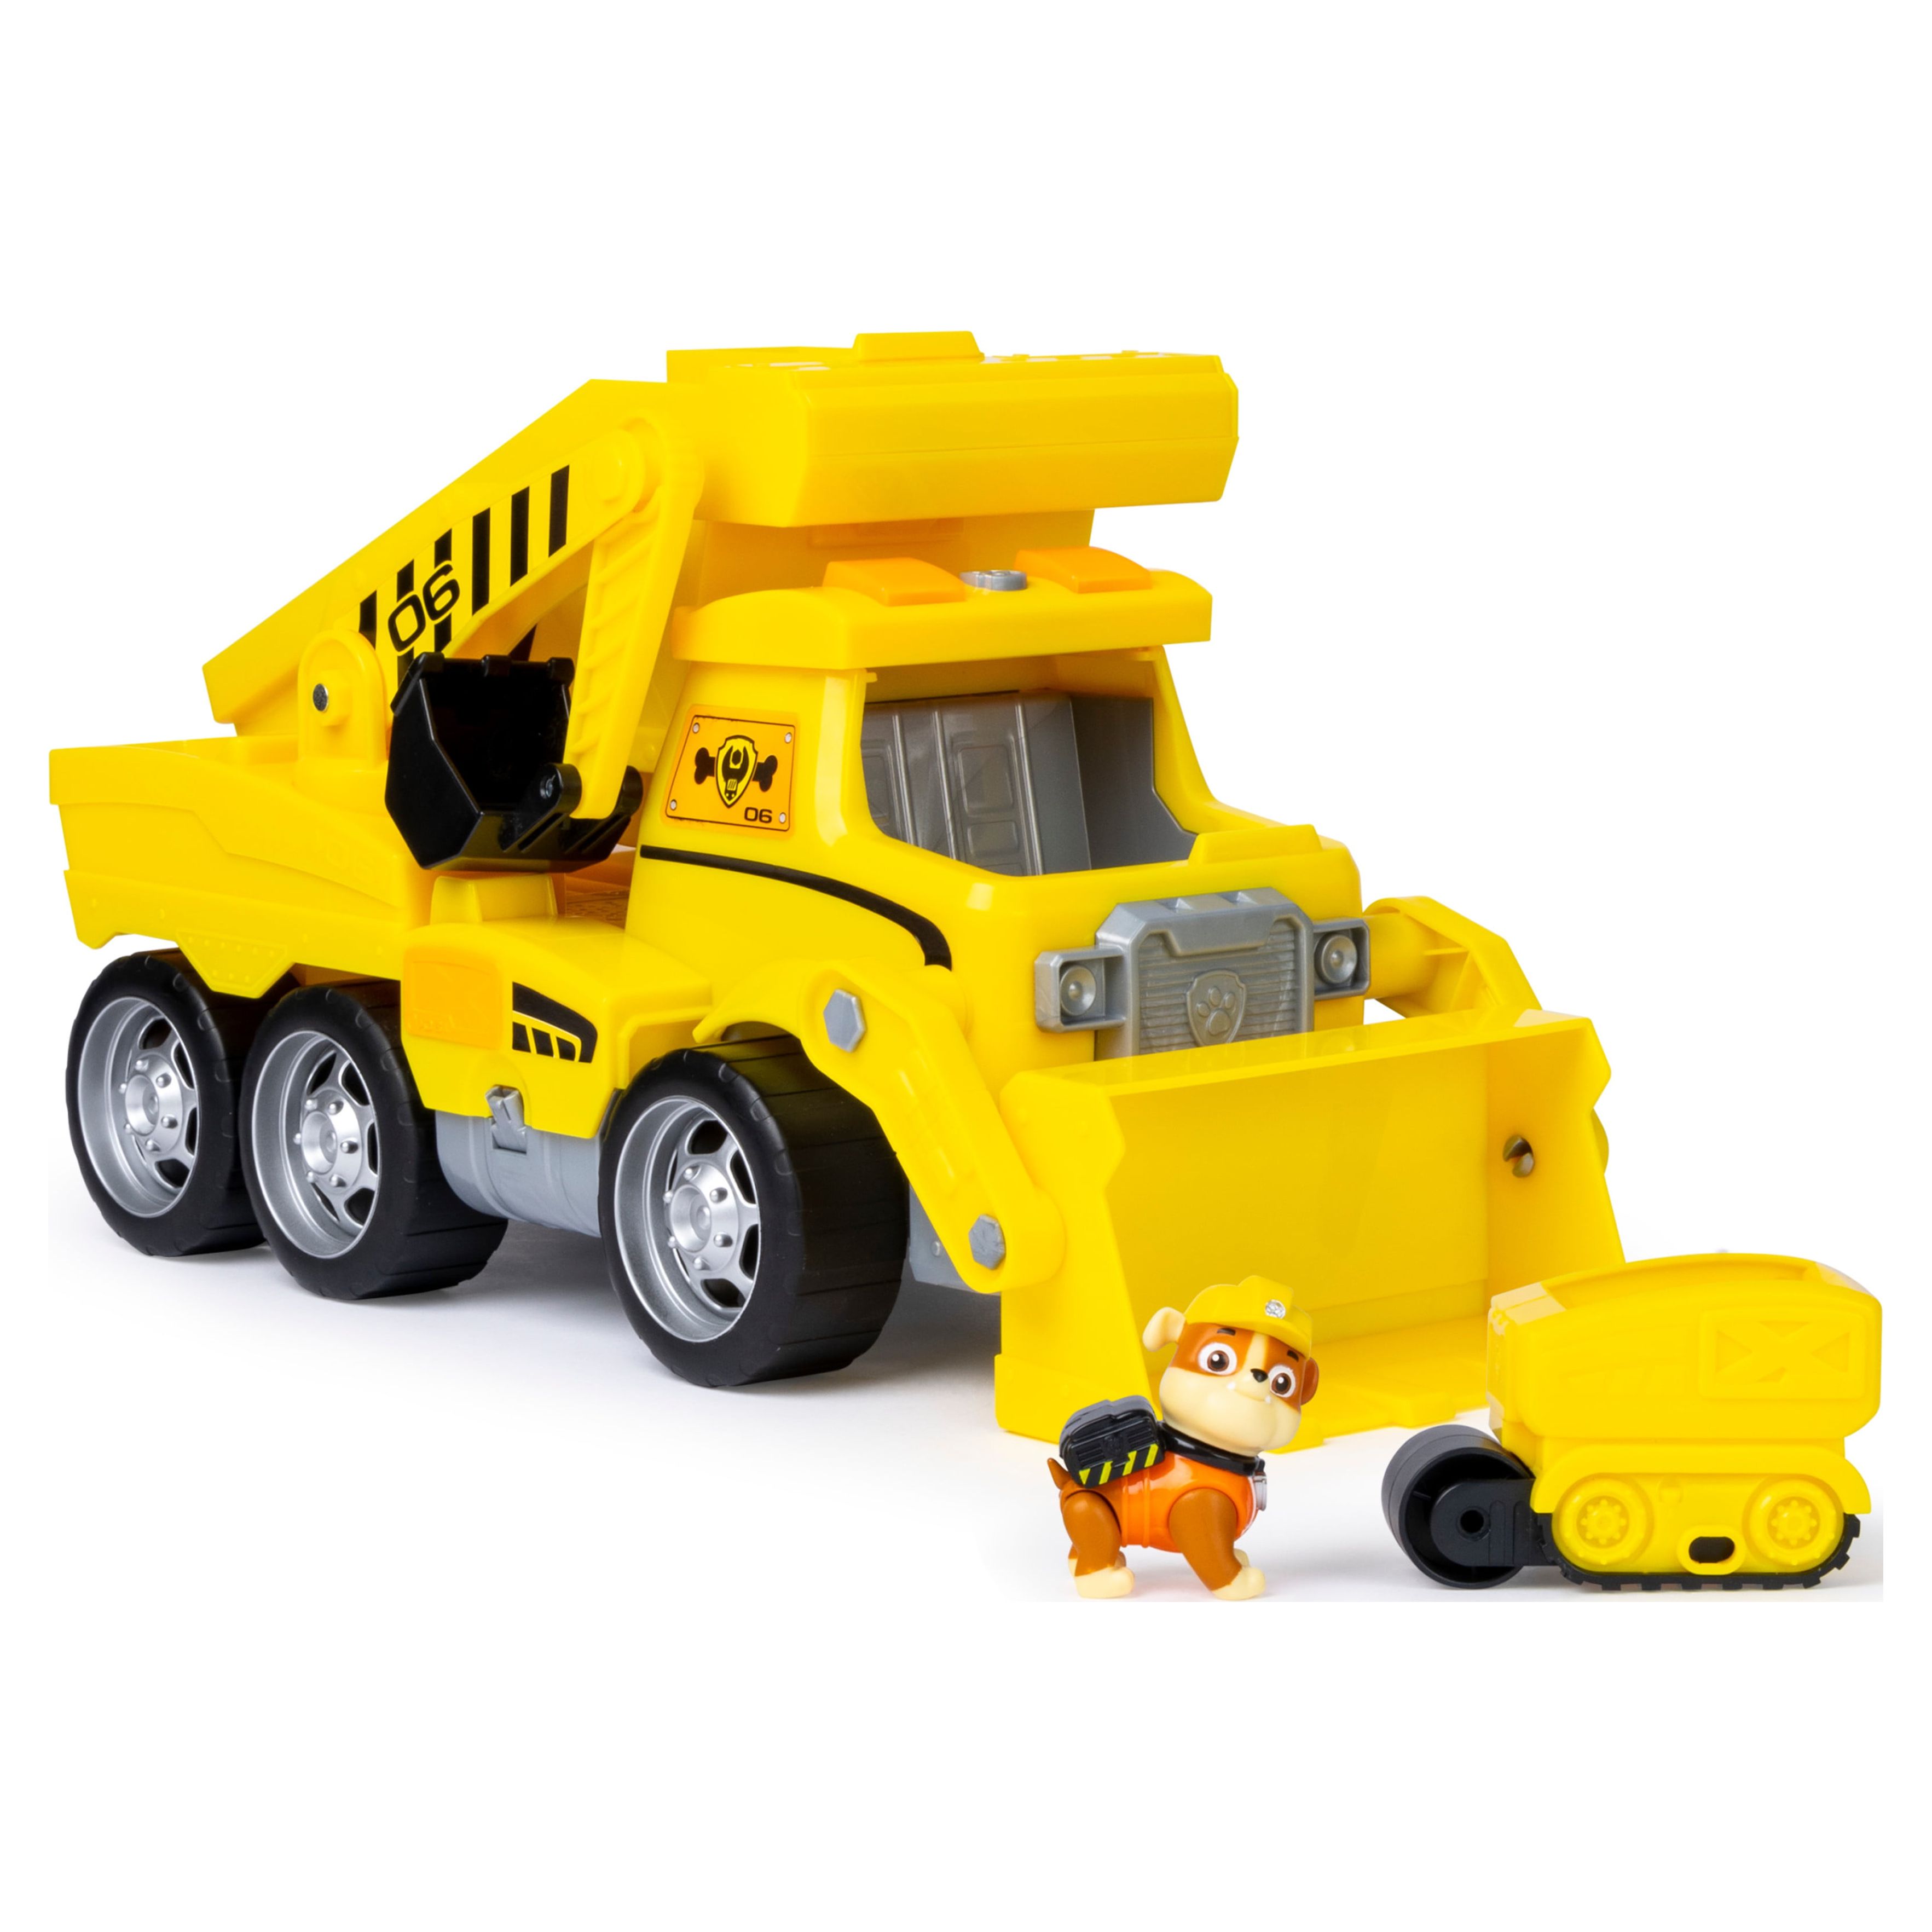 PAW Patrol, Rubble's Construction Truck with Mini Vehicle and Figure, For Ages 3 and up - image 1 of 8